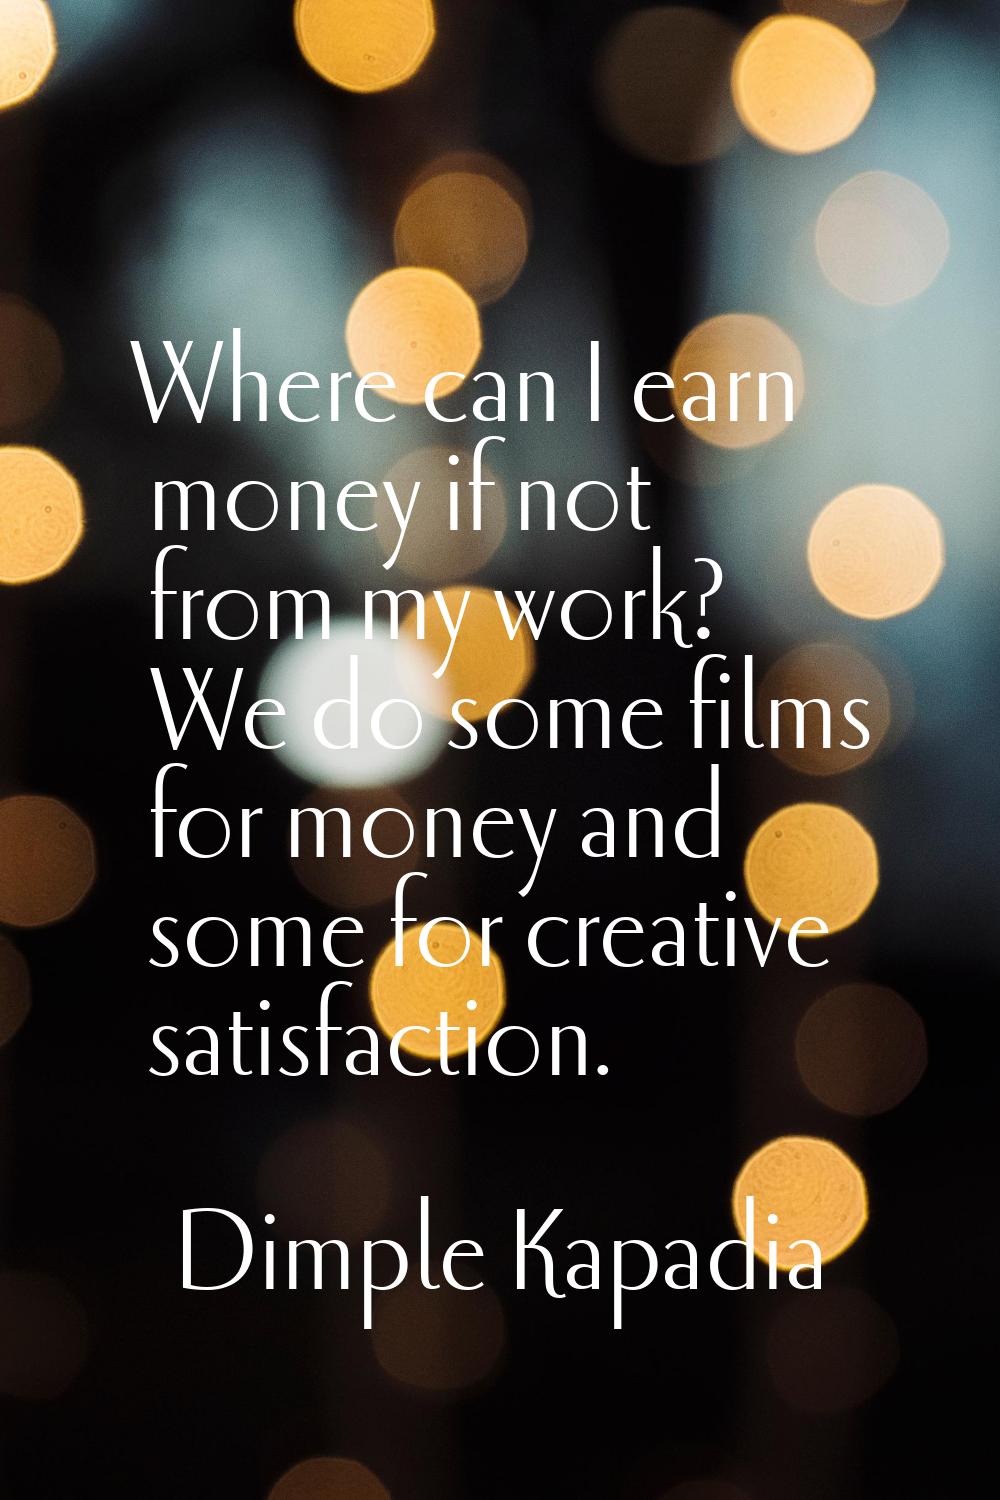 Where can I earn money if not from my work? We do some films for money and some for creative satisf